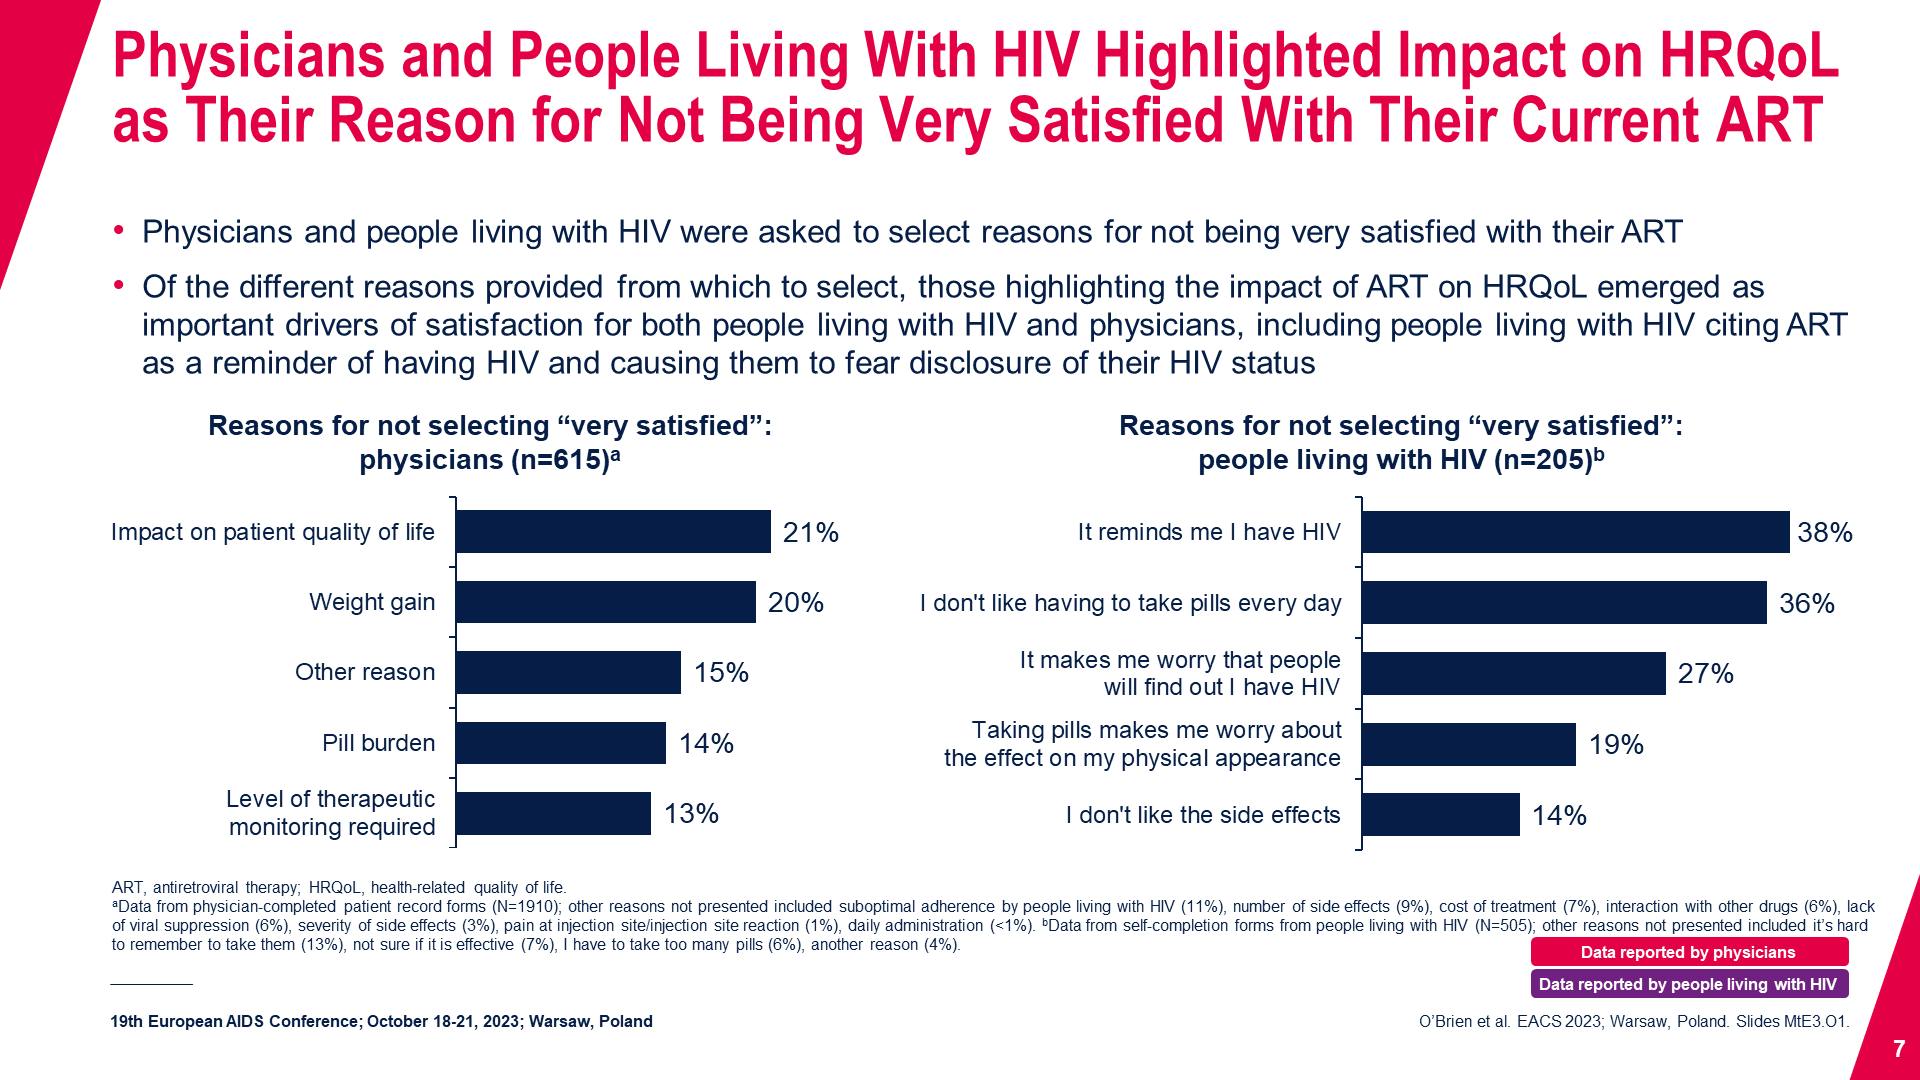 Physicians and People Living With HIV Highlighted Impact on HRQoL as Their Reason for Not Being Very Satisfied With Their Current ART 